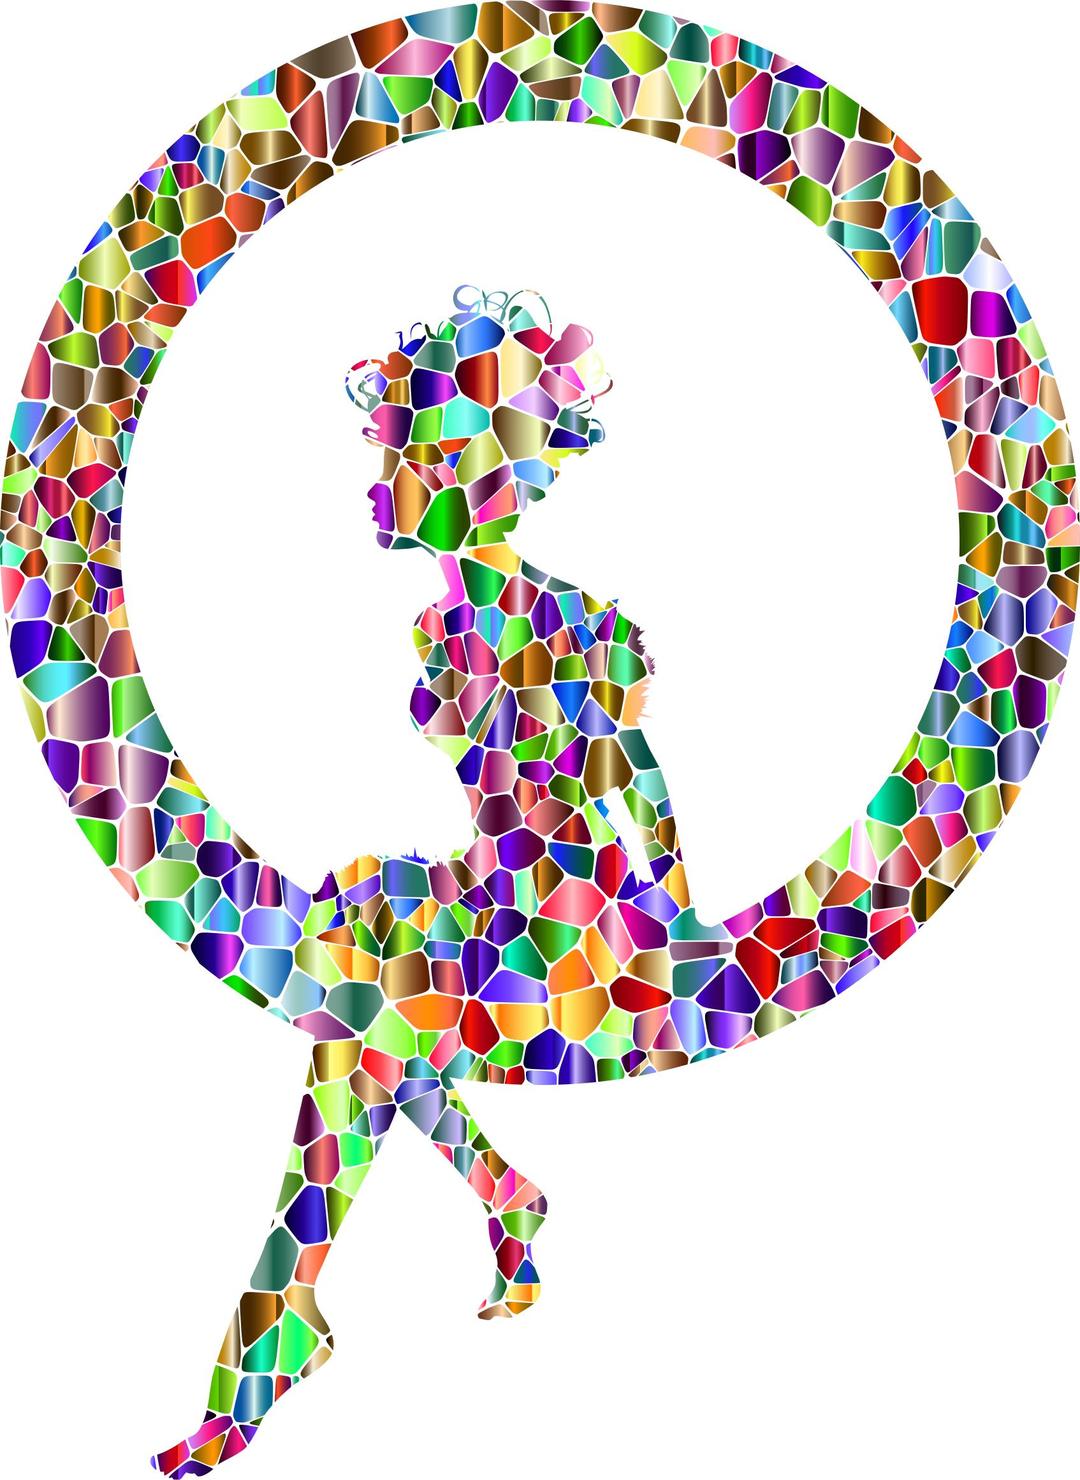 Polychromatic Tiled Fairy Sitting In A Circle Silhouette png transparent